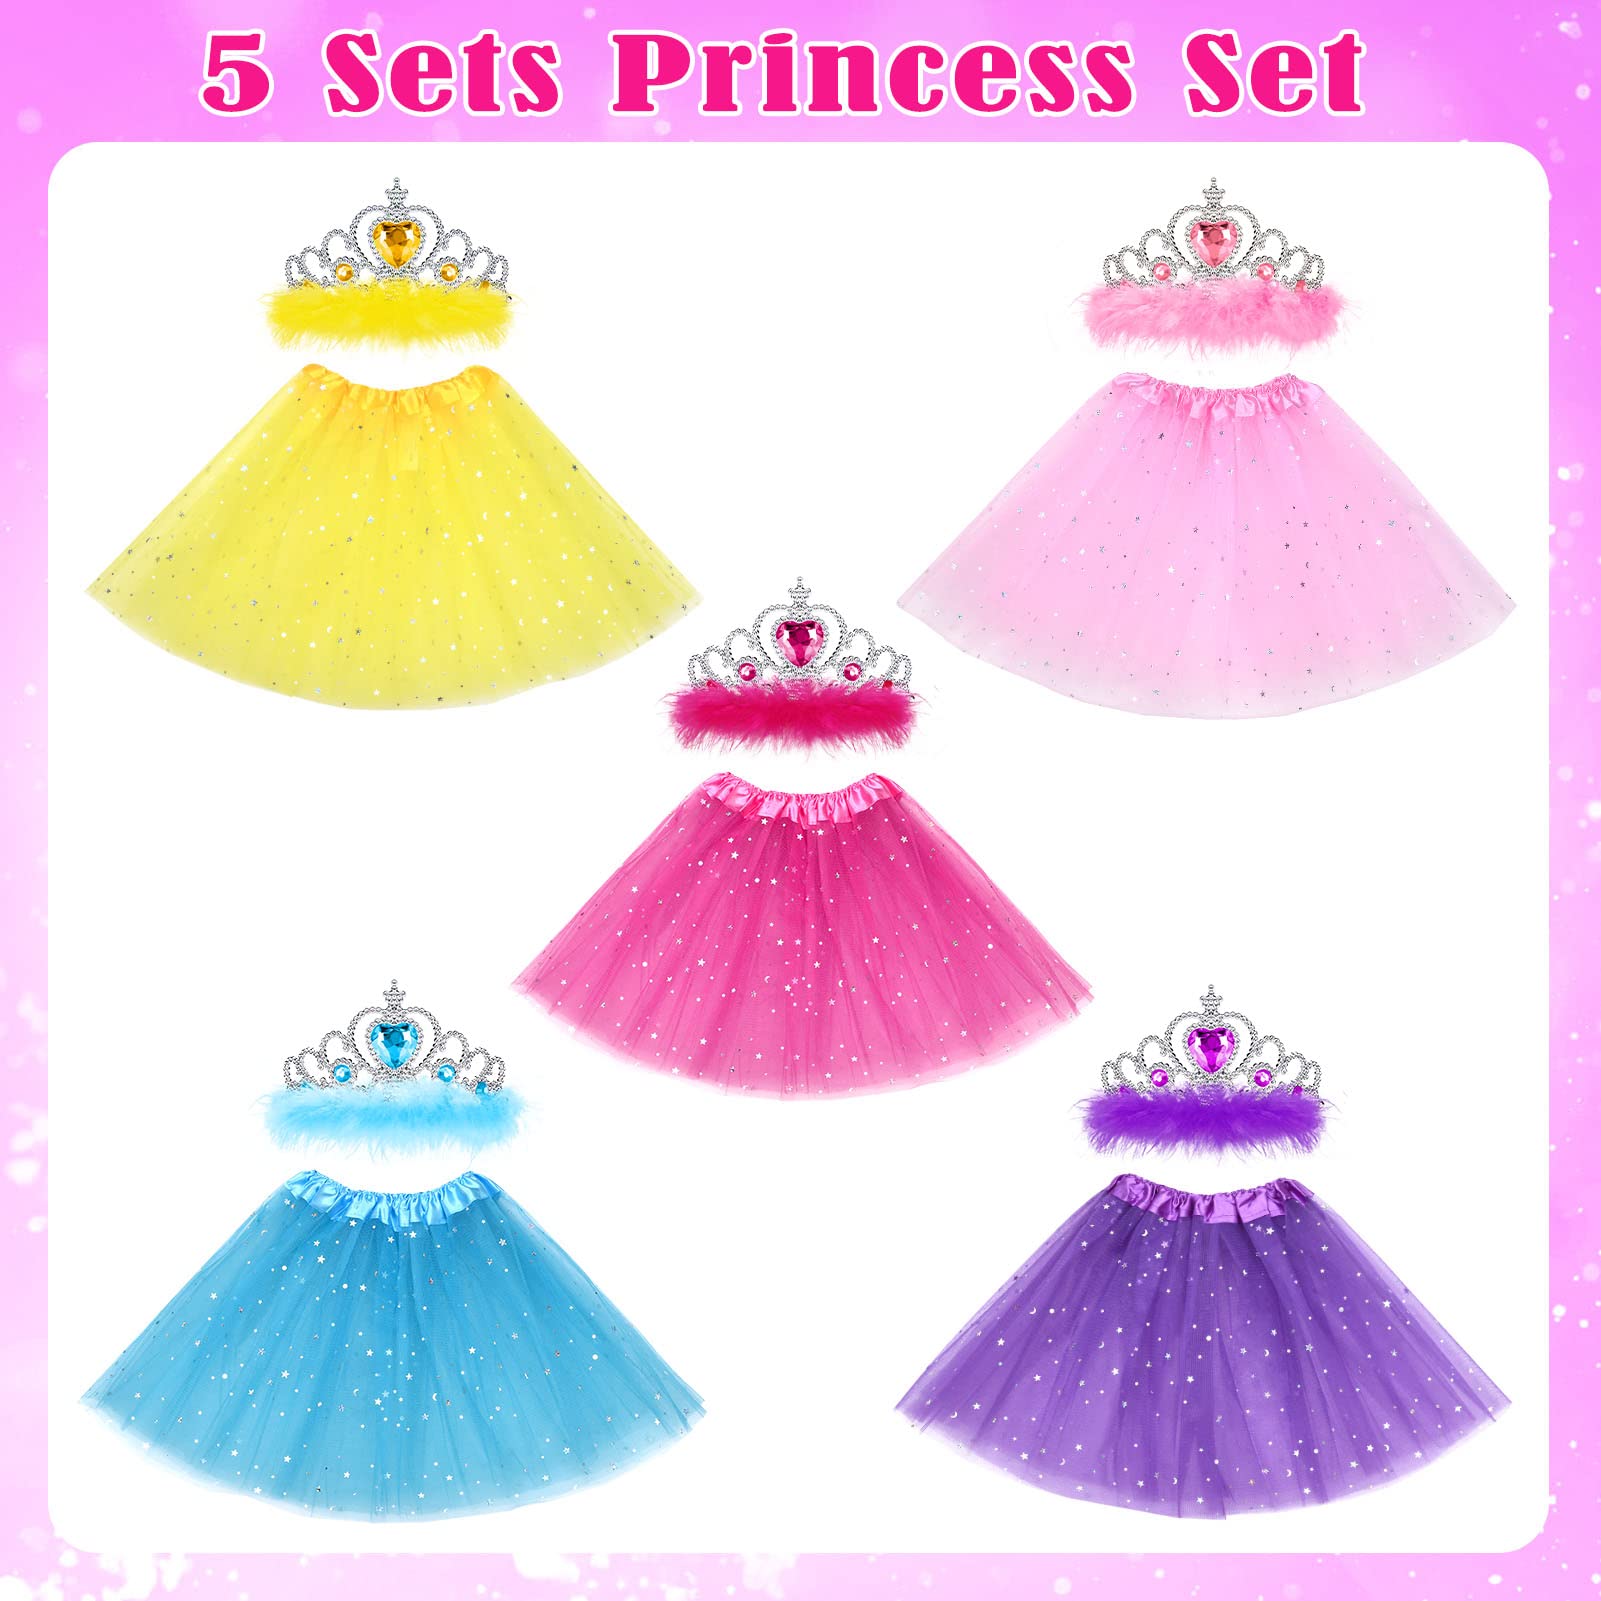 G.C Girls Princess Dress up Clothes with Star Sequins and Princess Crown Tiara Set Ballet Birthday Party for 2-8 Year Old Girl Gifts Tutu Skirt as Party Favors